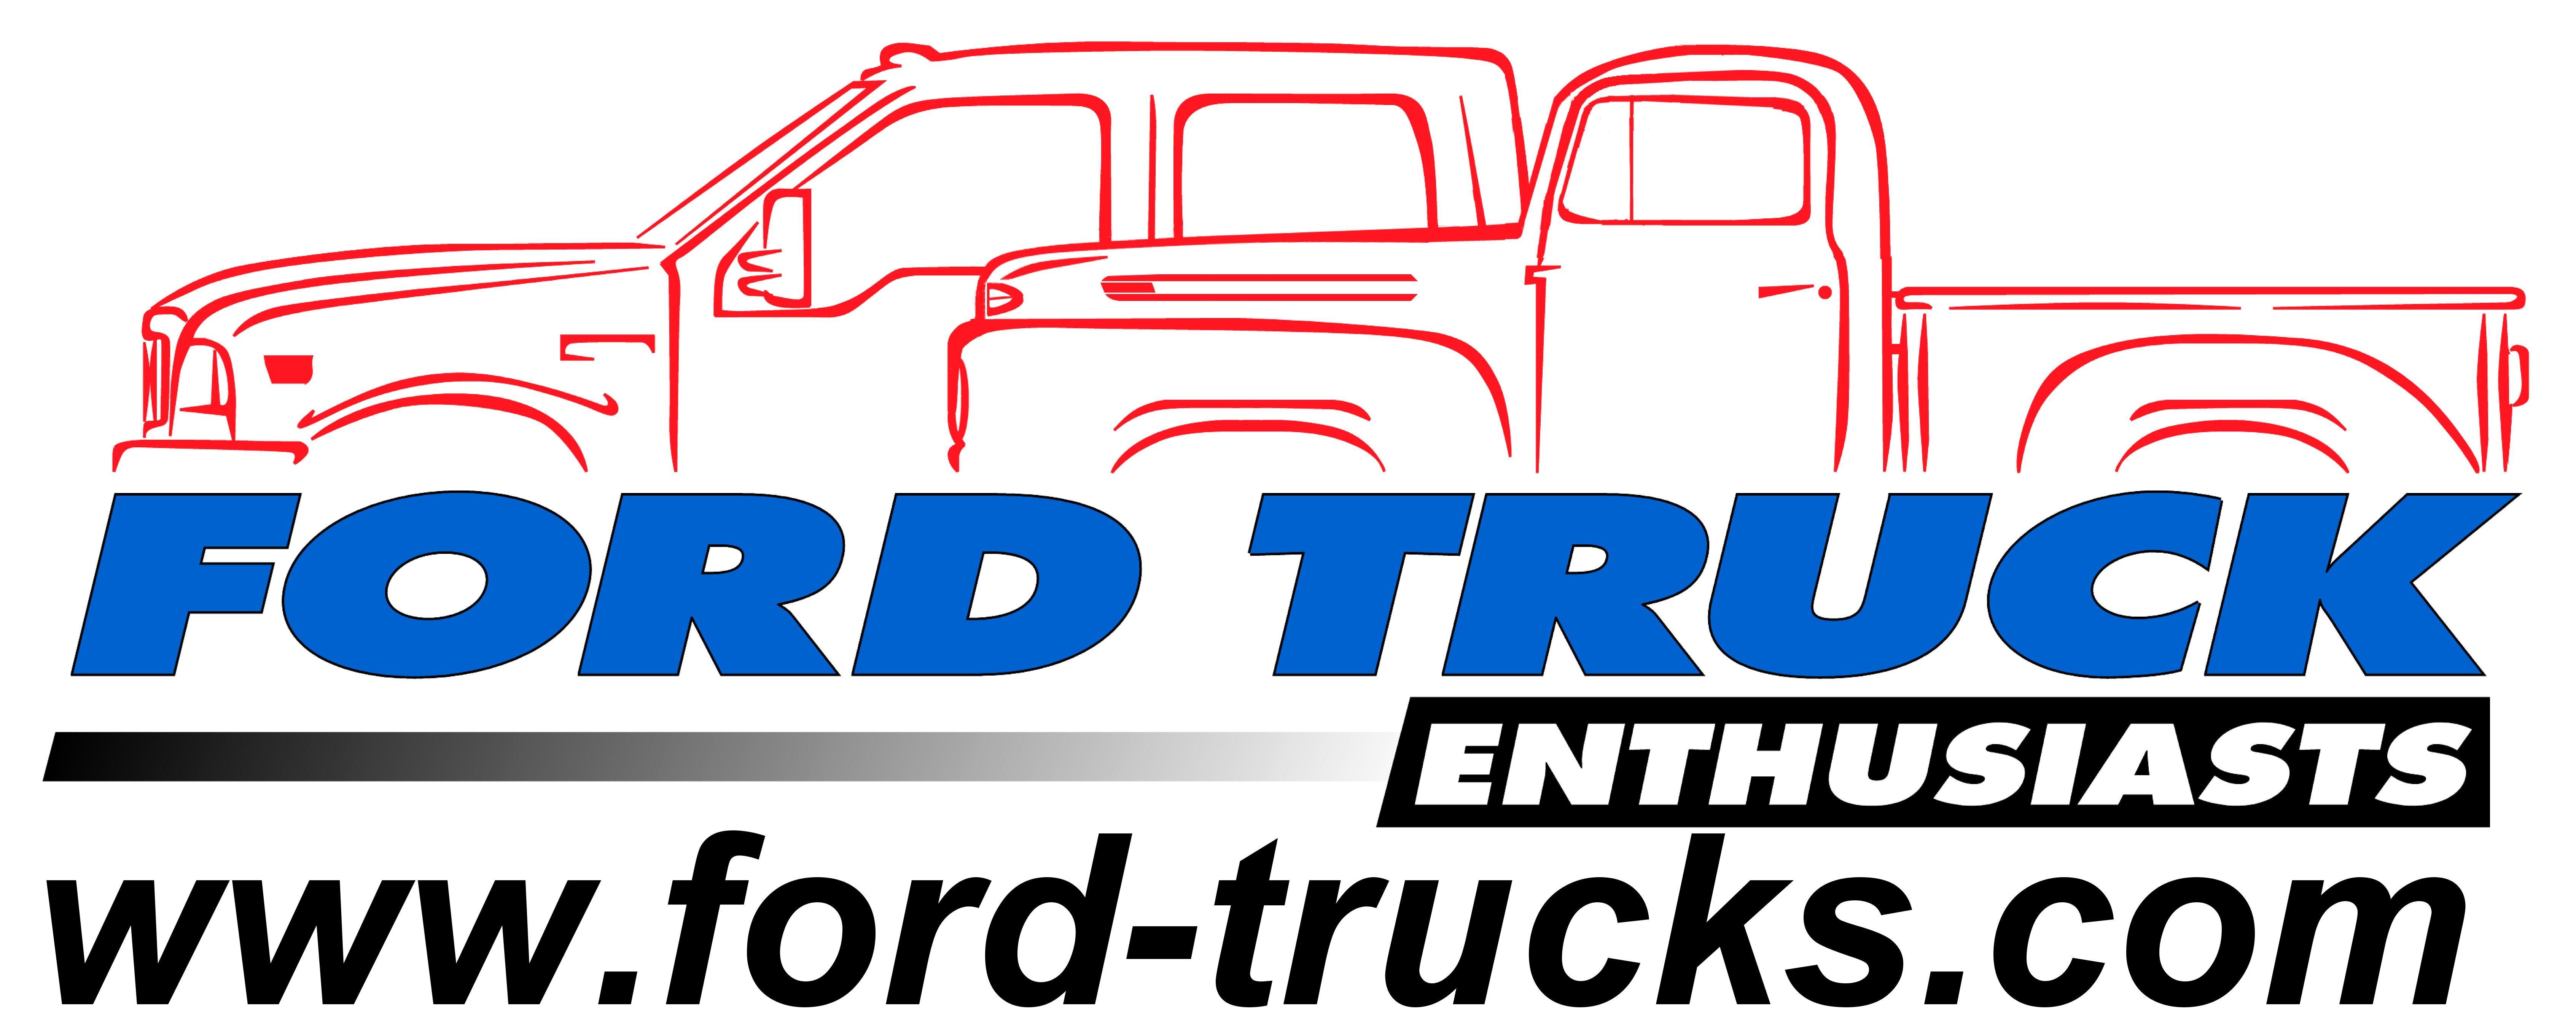 New Ford Truck Logo - Ford truck Logos